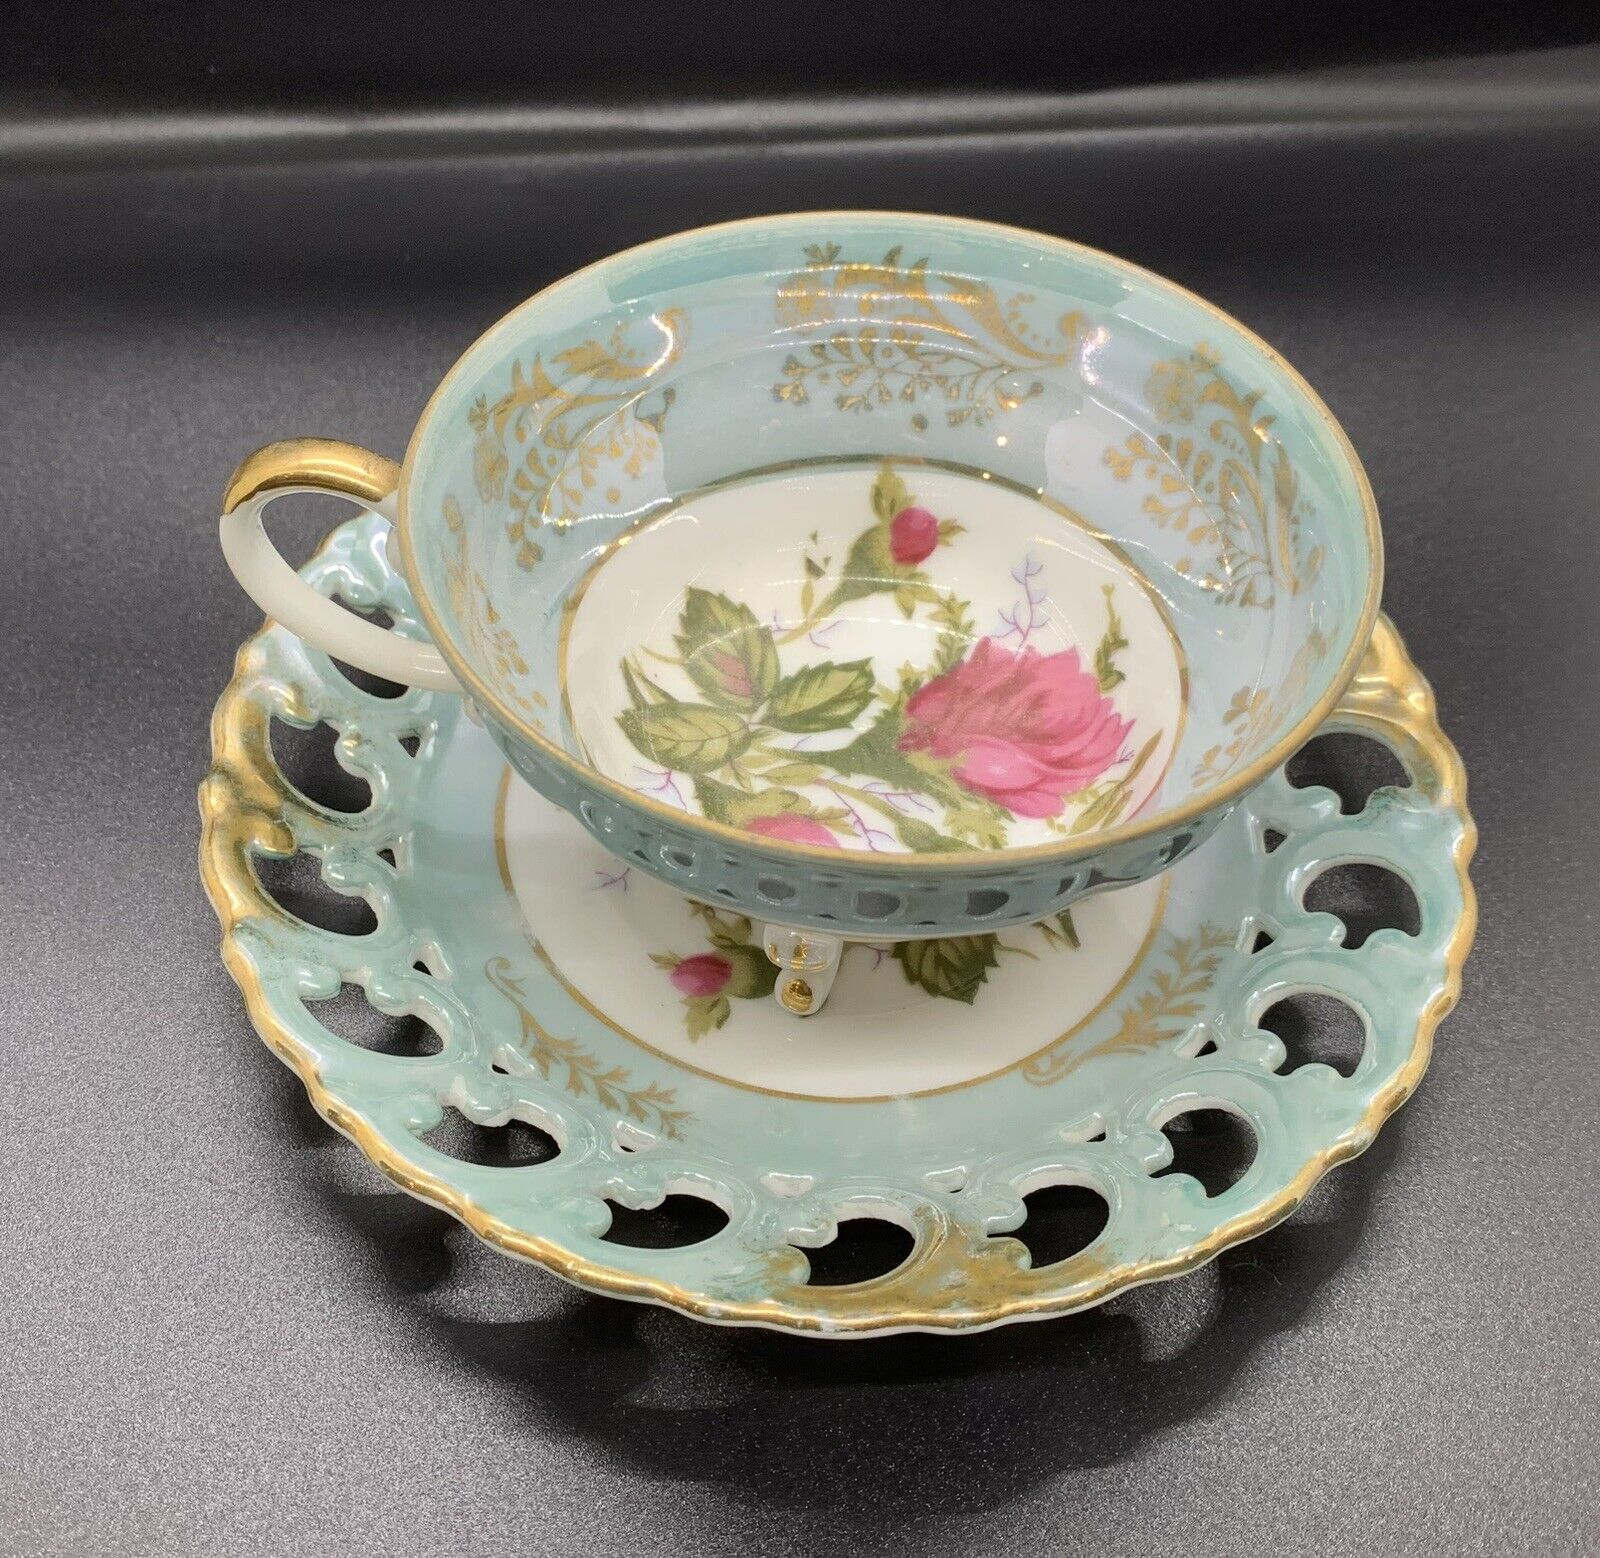 Original Vintage Royal Sealy China Cup and Saucer Roses Footed Open Edges